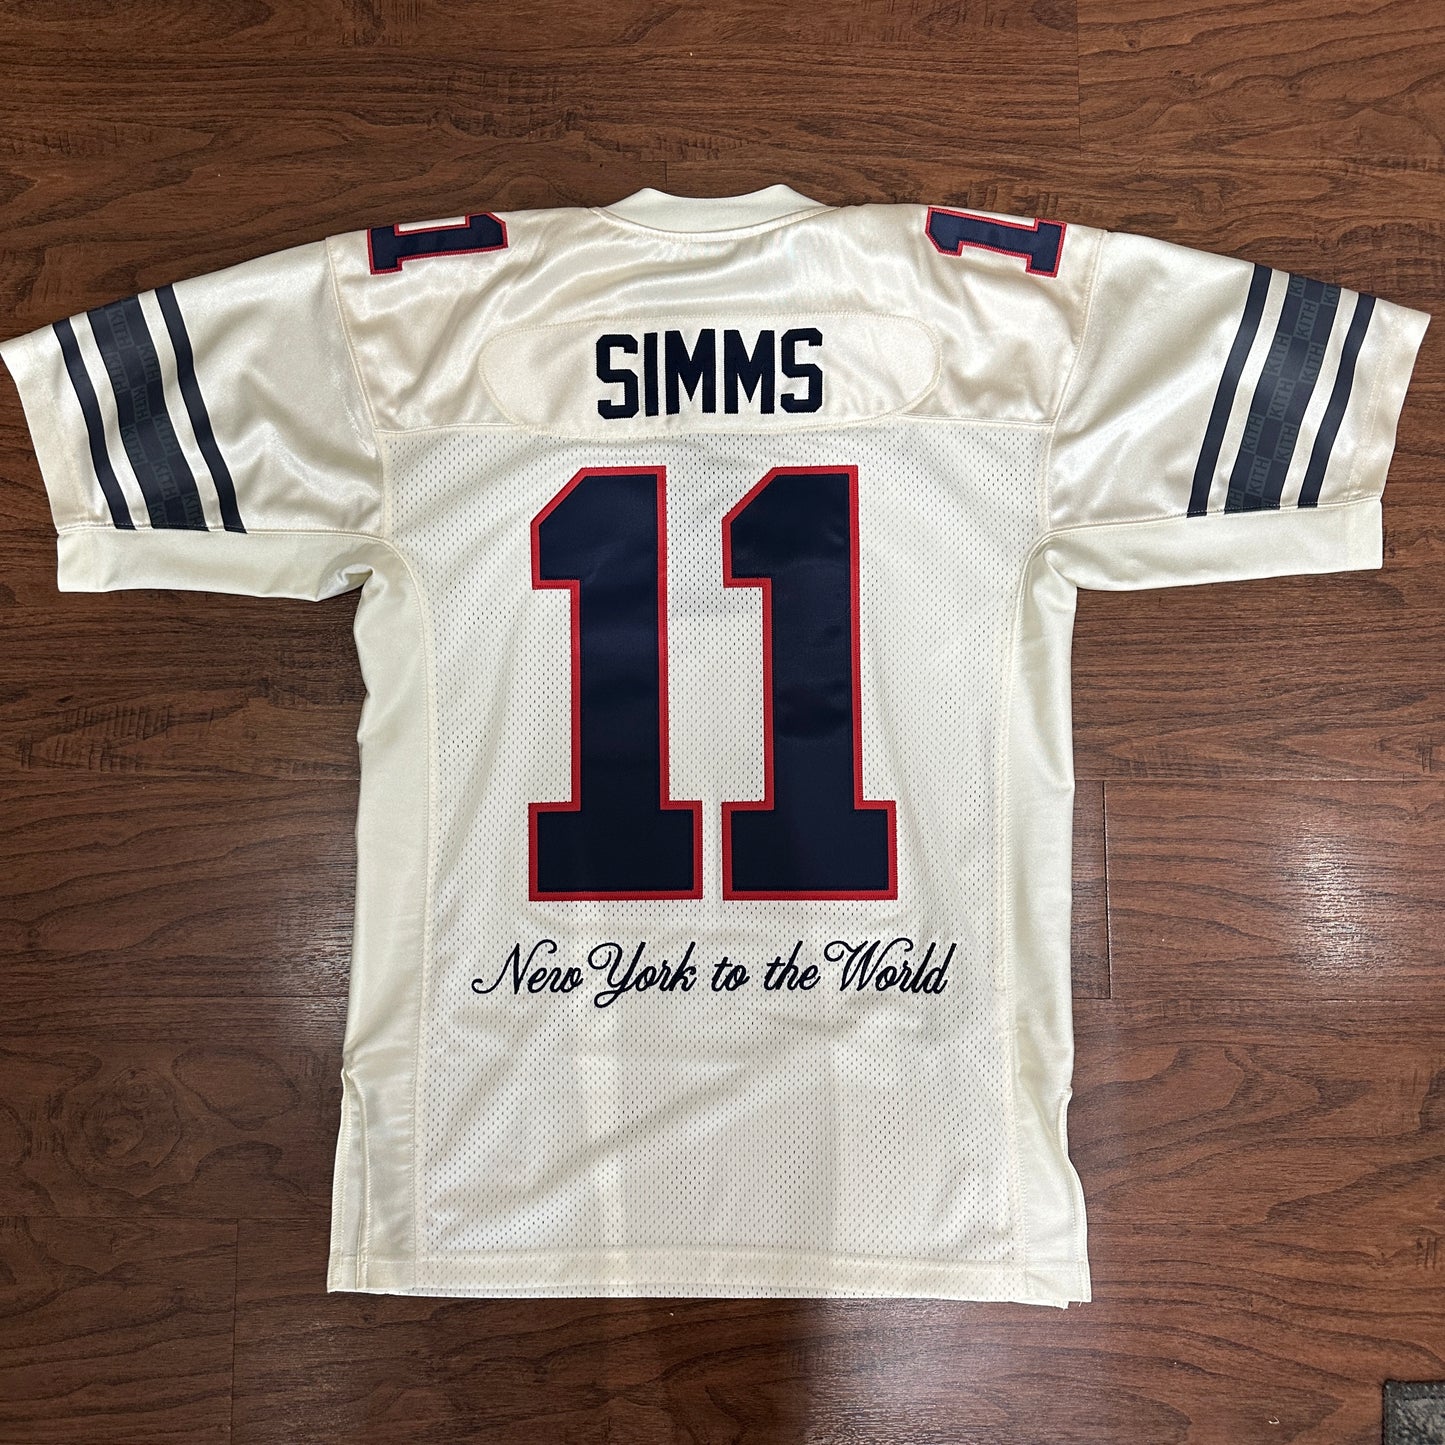 KITH x NFL Giants Jersey Phil Simms (Size M)